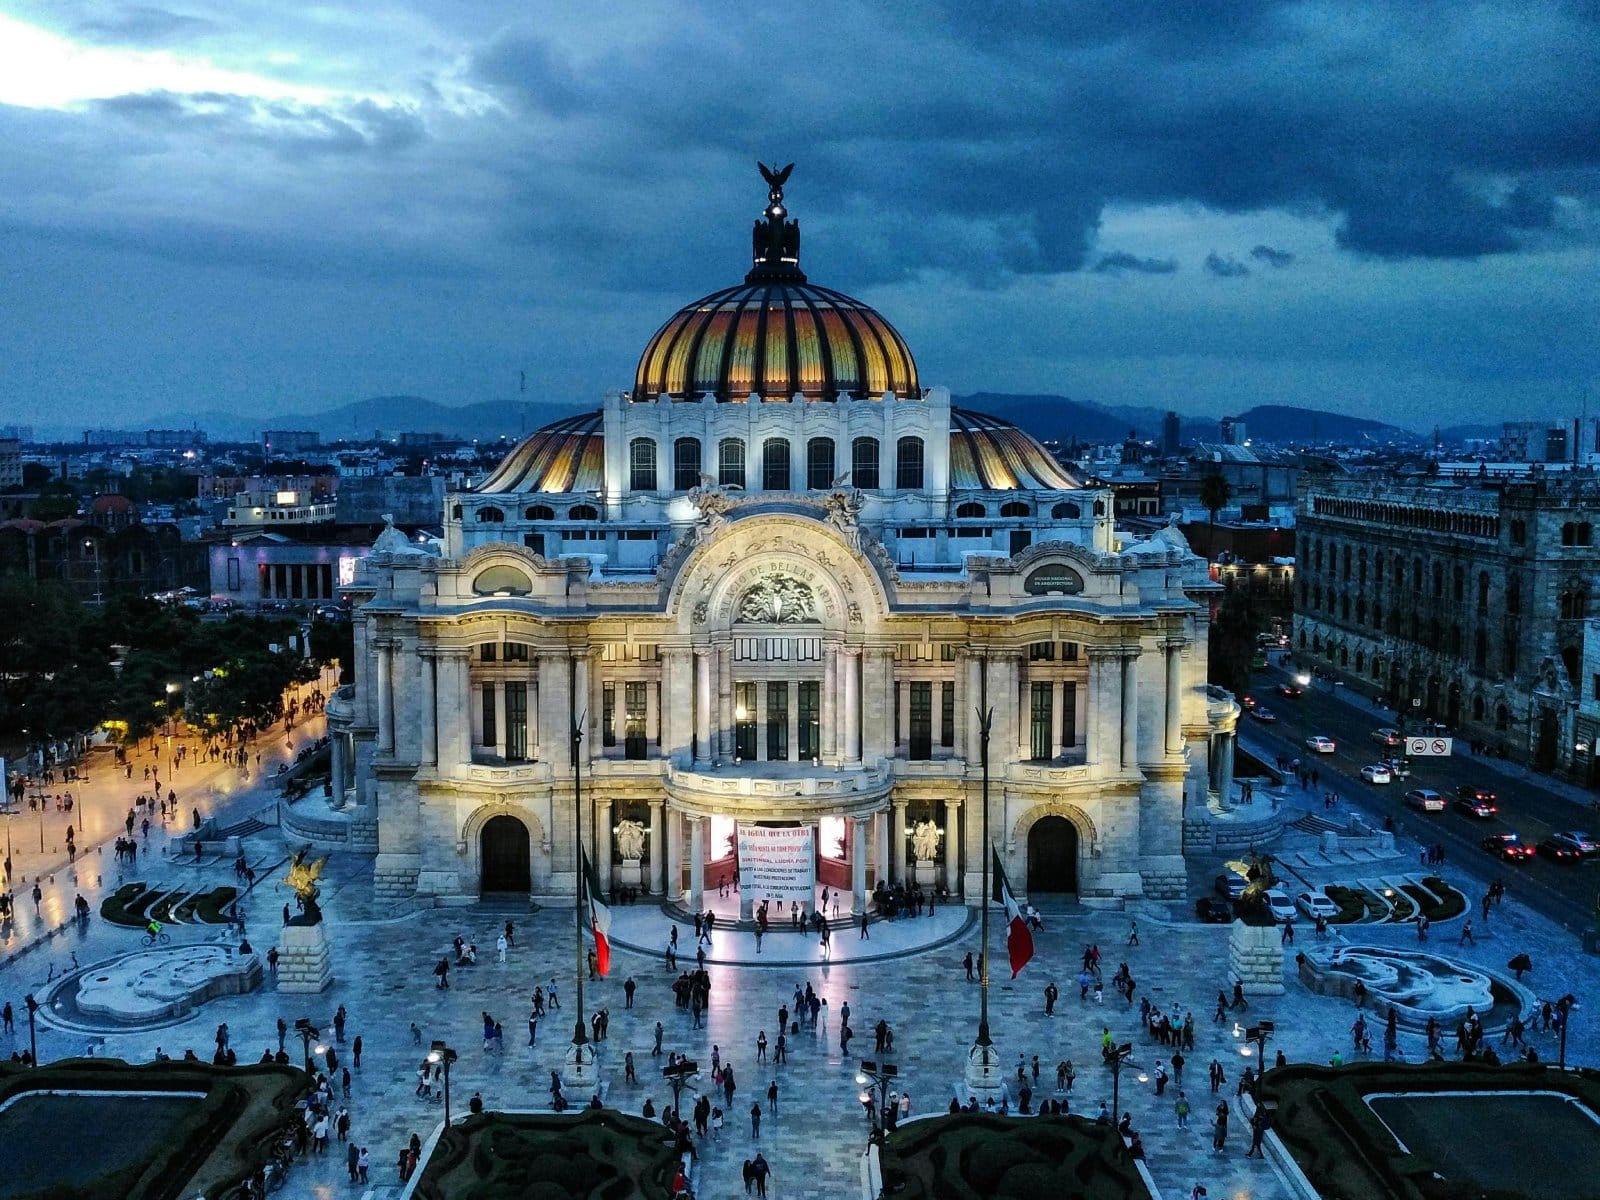 <p class="wp-caption-text">Image Credit: Pexels / Ivon Gorgonio</p>  <p><span>Mexico City, one of the oldest cities in the Americas, is a vibrant metropolis that boasts an impressive array of historical sites, museums, and culinary experiences. The city’s heart, the Zócalo, is surrounded by landmarks such as the Metropolitan Cathedral and the National Palace. Mexico City’s cuisine, from street tacos to gourmet restaurants, is a highlight of any visit.</span></p> <p><span>The city’s rich history is palpable in its neighborhoods, from the ancient canals of Xochimilco to the bohemian streets of Coyoacán. The Frida Kahlo Museum, located in her former home, offers insight into the life of one of Mexico’s most iconic artists. Mexico City’s parks, like Chapultepec, provide green spaces for relaxation and recreation. The city’s vibrant energy, rich cultural heritage, and culinary delights make it a captivating destination for travelers.</span></p> <p><b>Insider’s Tip:</b><span> Explore the city’s markets, like La Merced or San Juan, for an authentic taste of Mexican food and culture.</span></p> <p><b>When to Travel:</b><span> The dry season from November to April is ideal for visiting.</span></p> <p><b>How to Get There:</b><span> Mexico City International Airport is the main entry point. The metro system is an efficient way to explore the city’s attractions.</span></p>